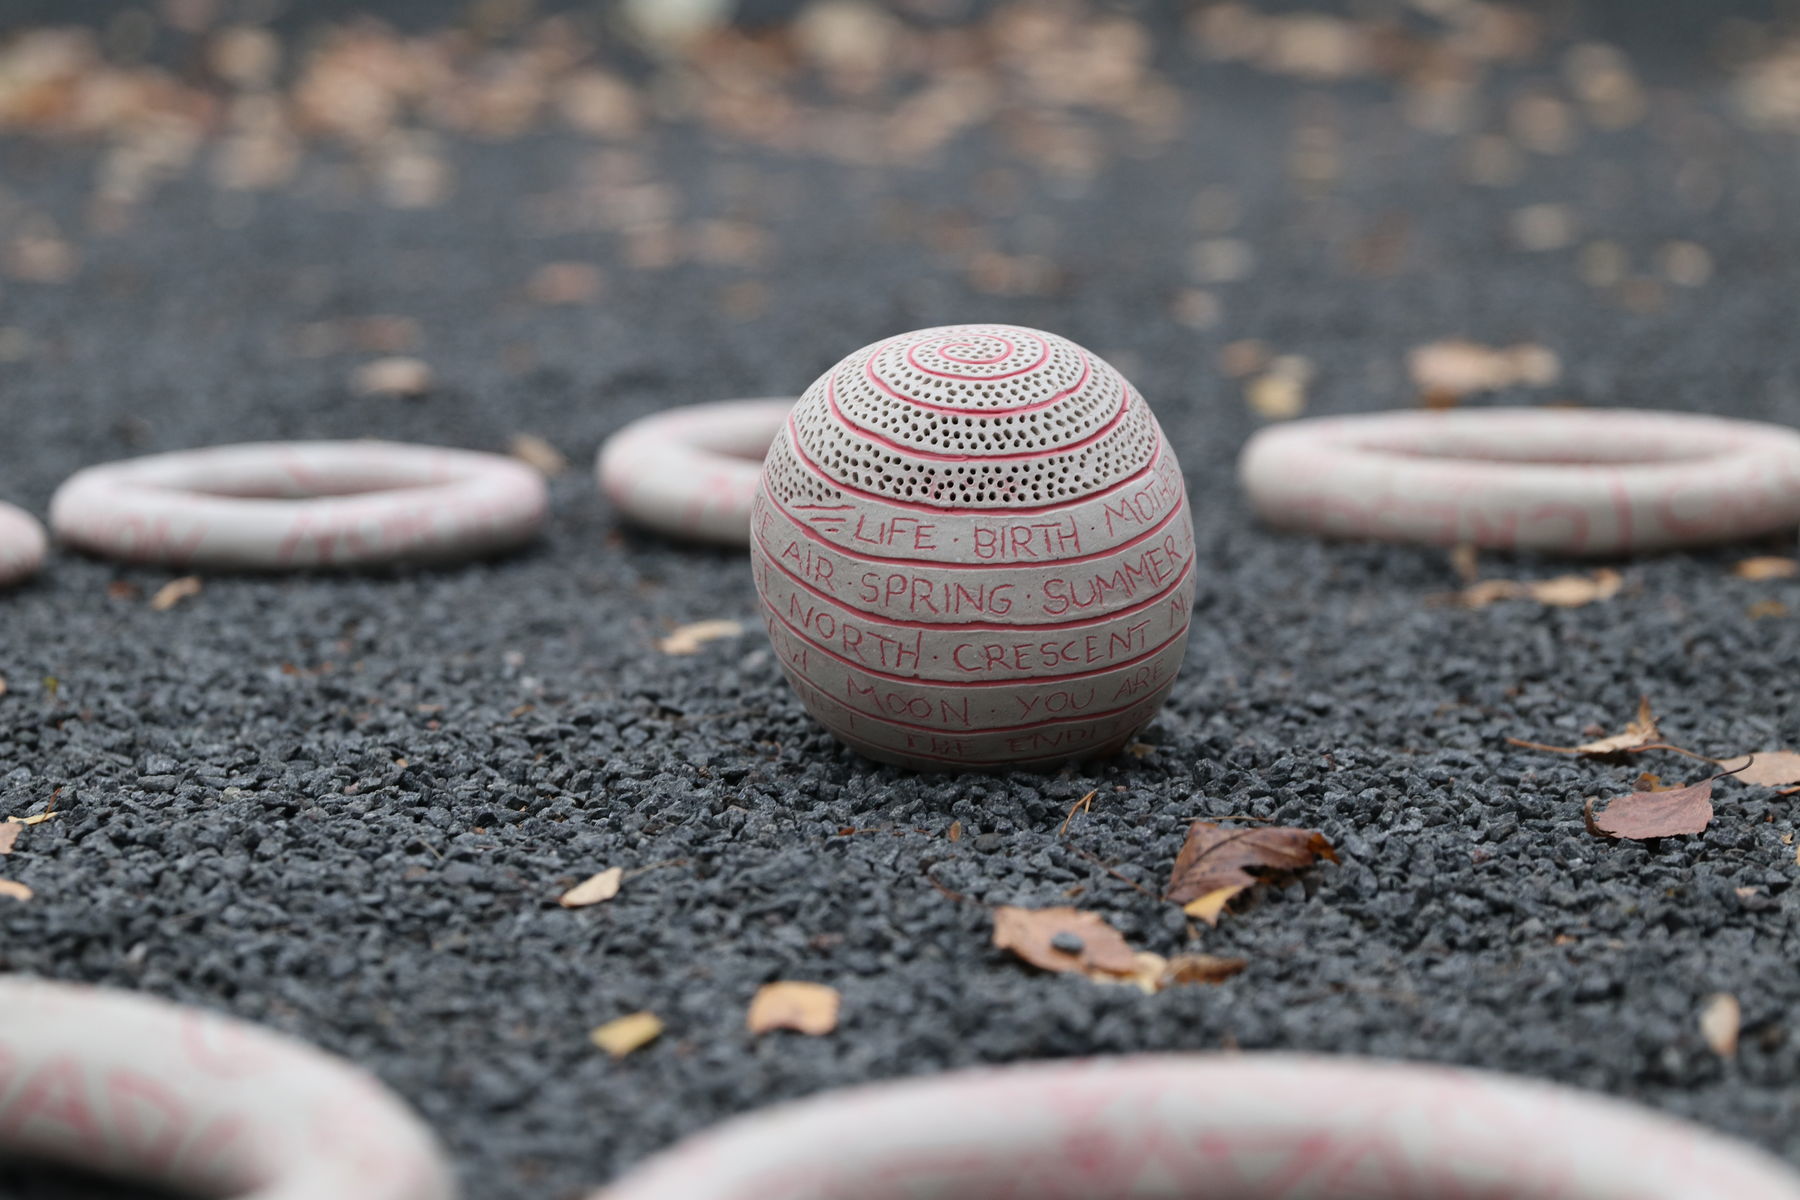 a close-up of a ceramic ball on ground